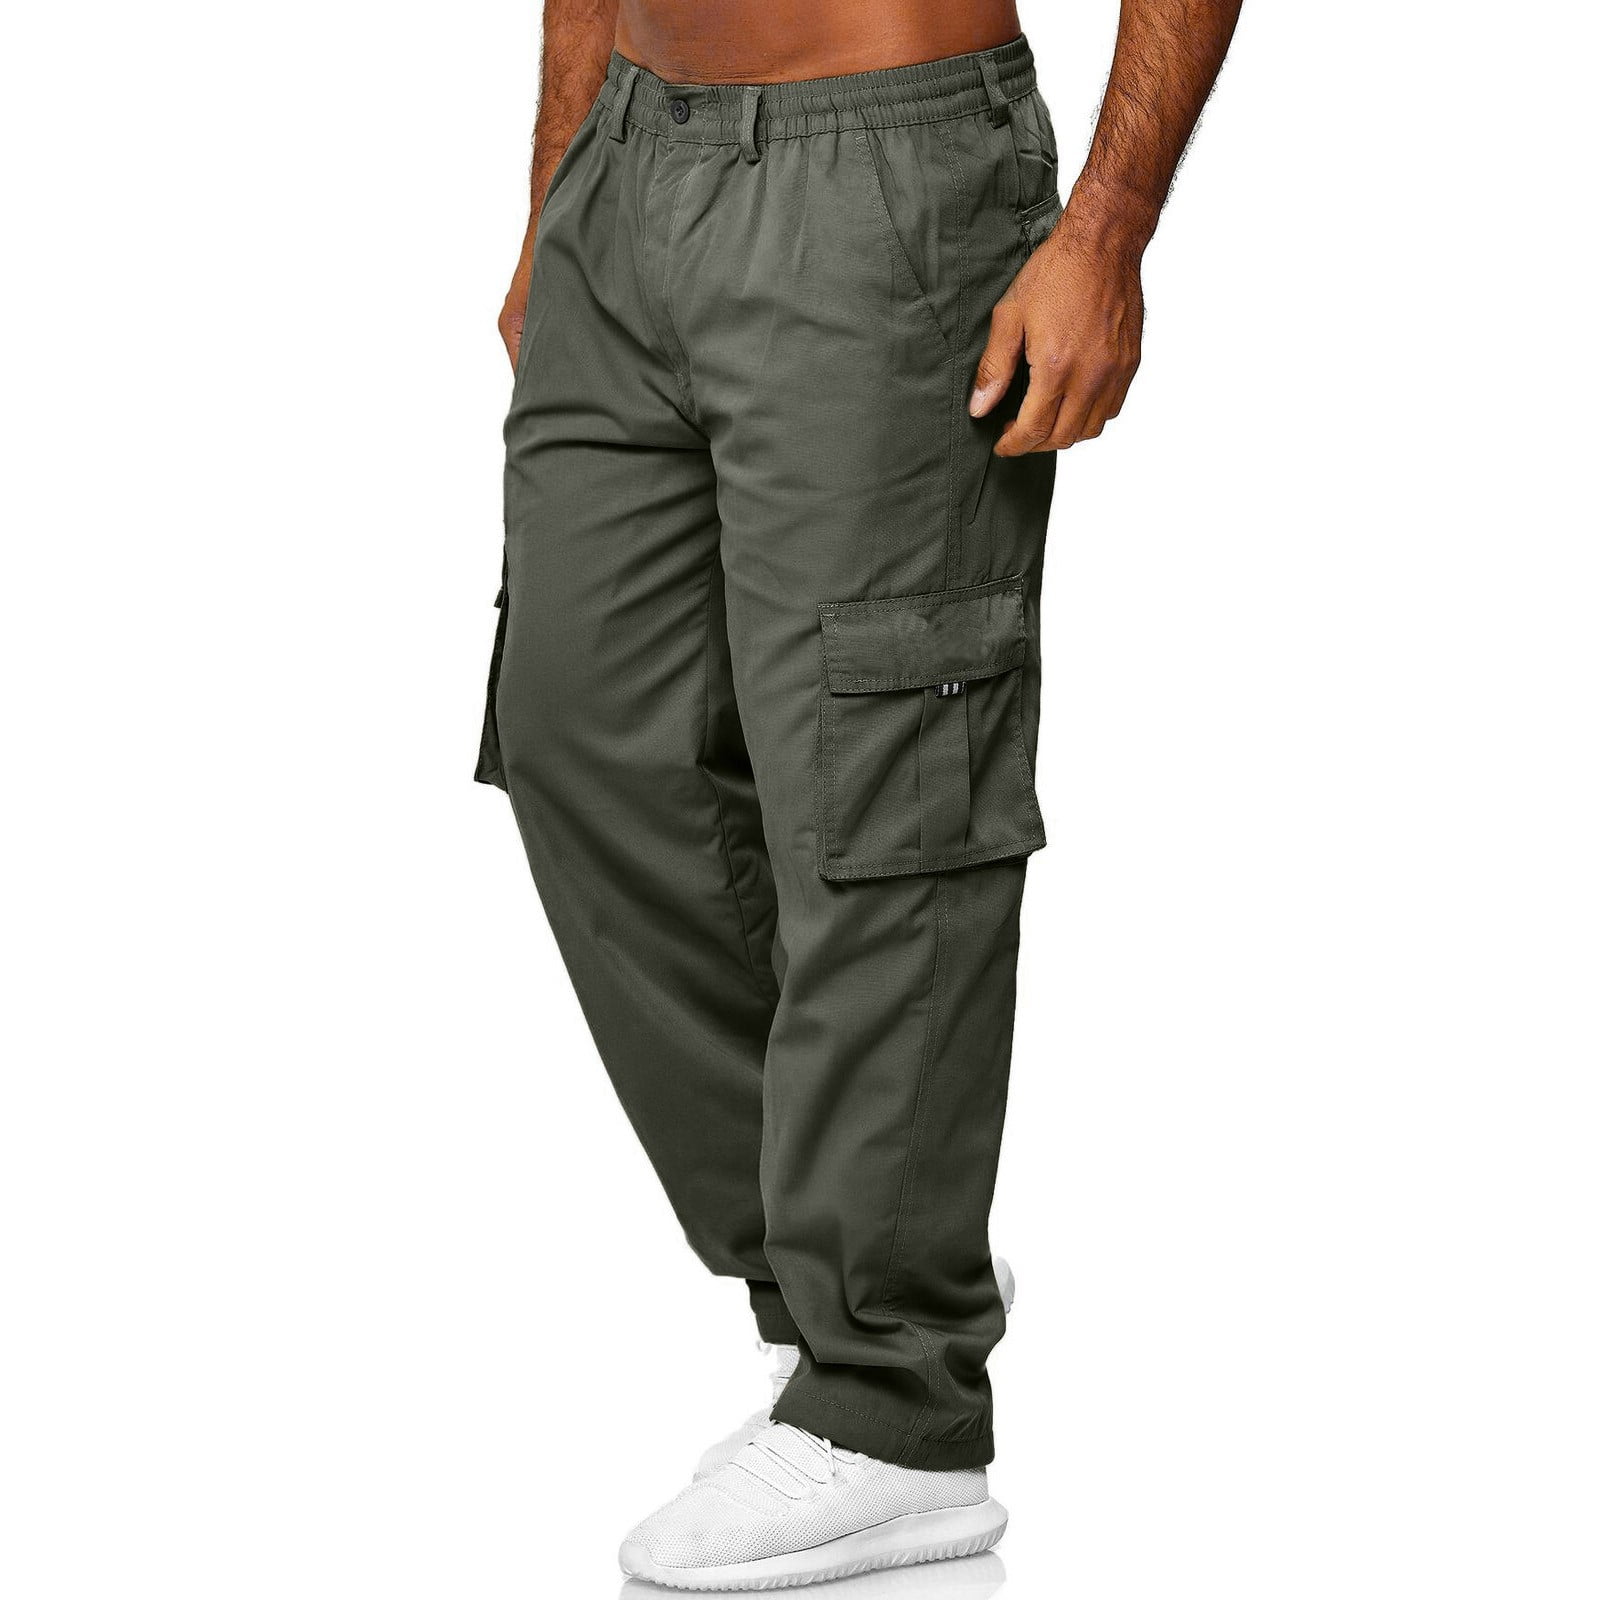 Aayomet Sweat Pants For Man Cargo Pants for Men, Mens Fashion Cargo ...